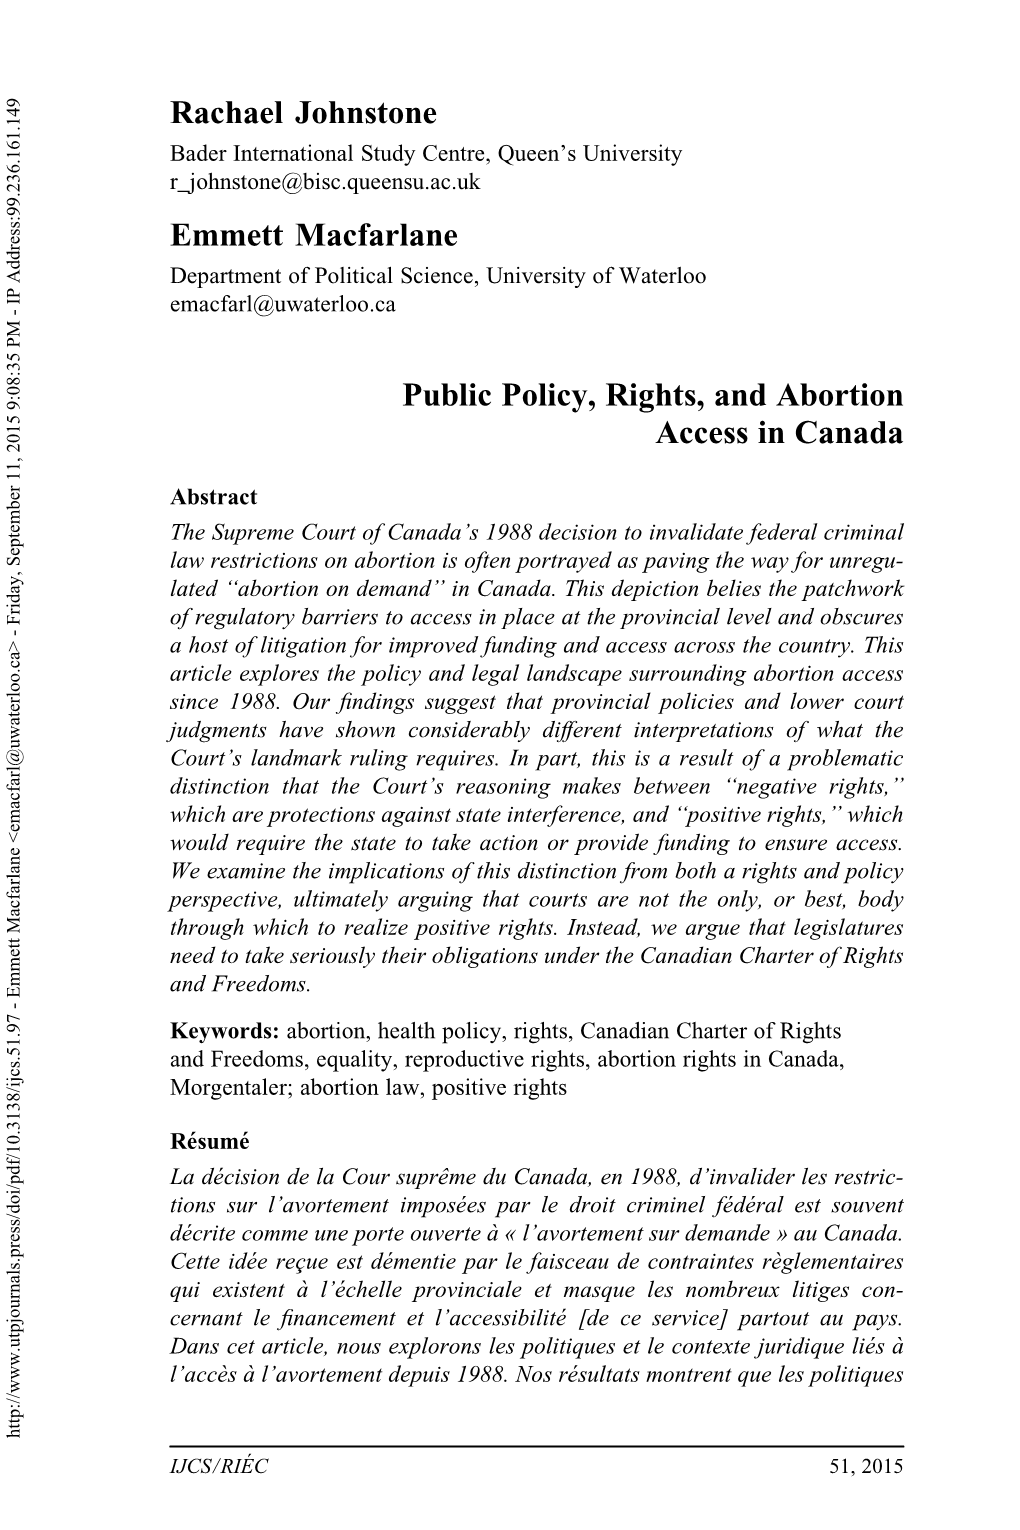 Public Policy, Rights, and Abortion Access in Canada